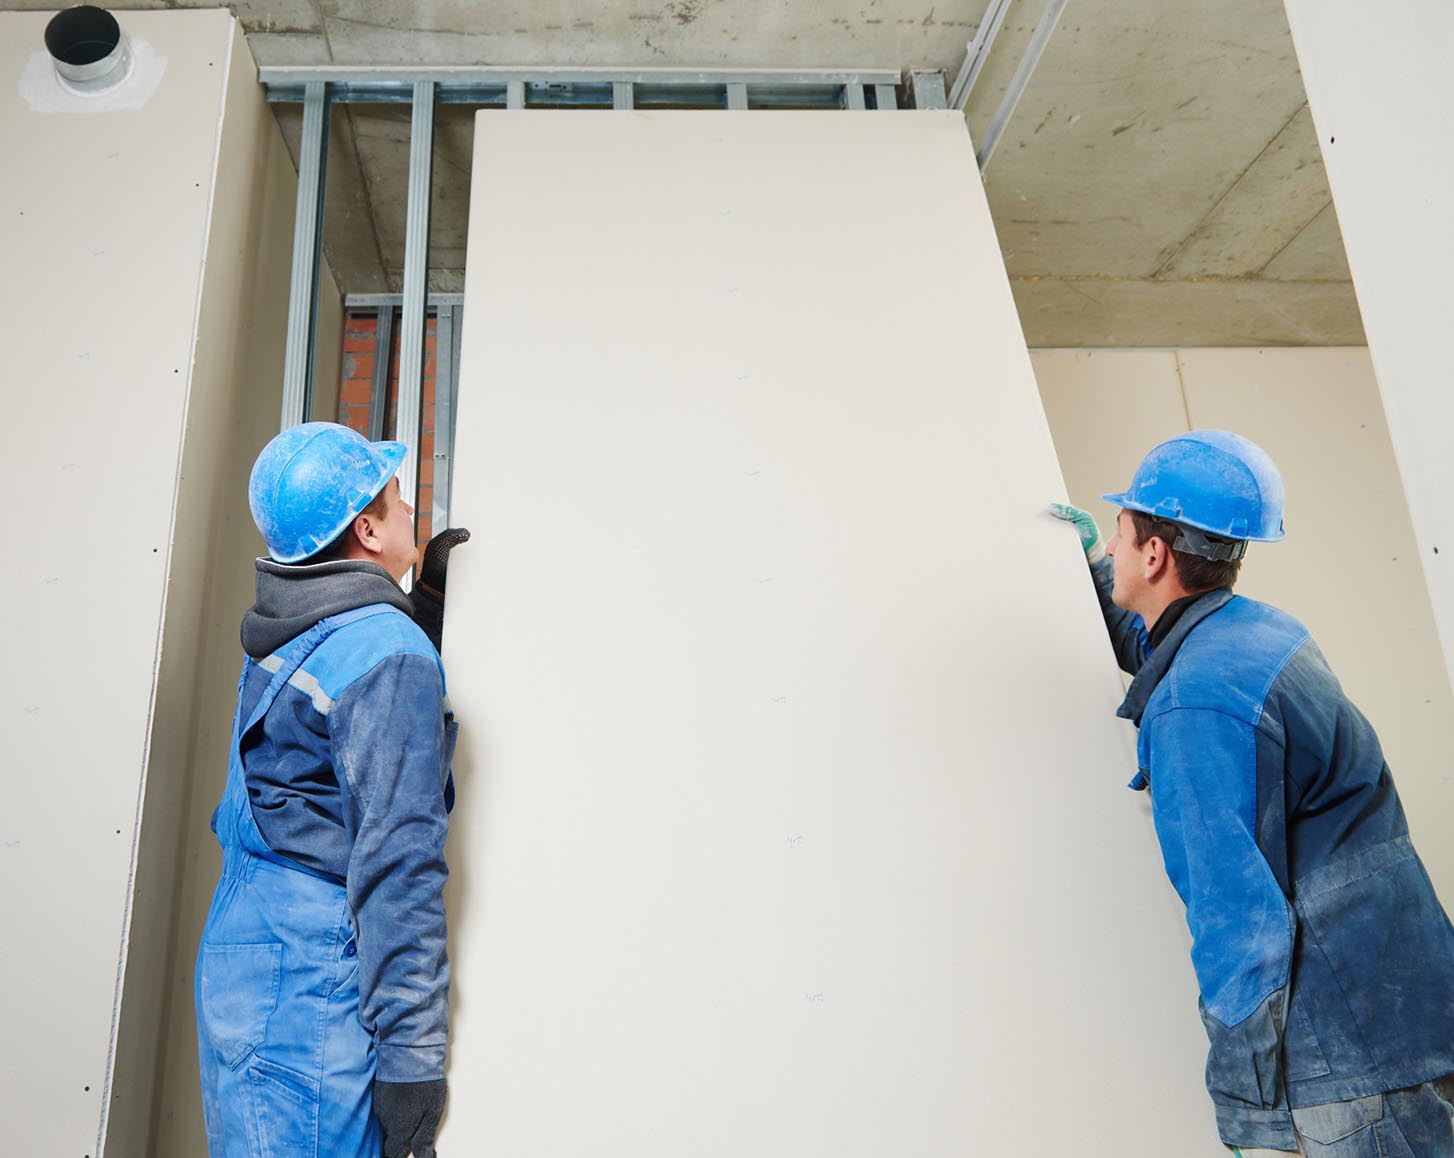 Two construction workers put a sheet of plasterboard into place